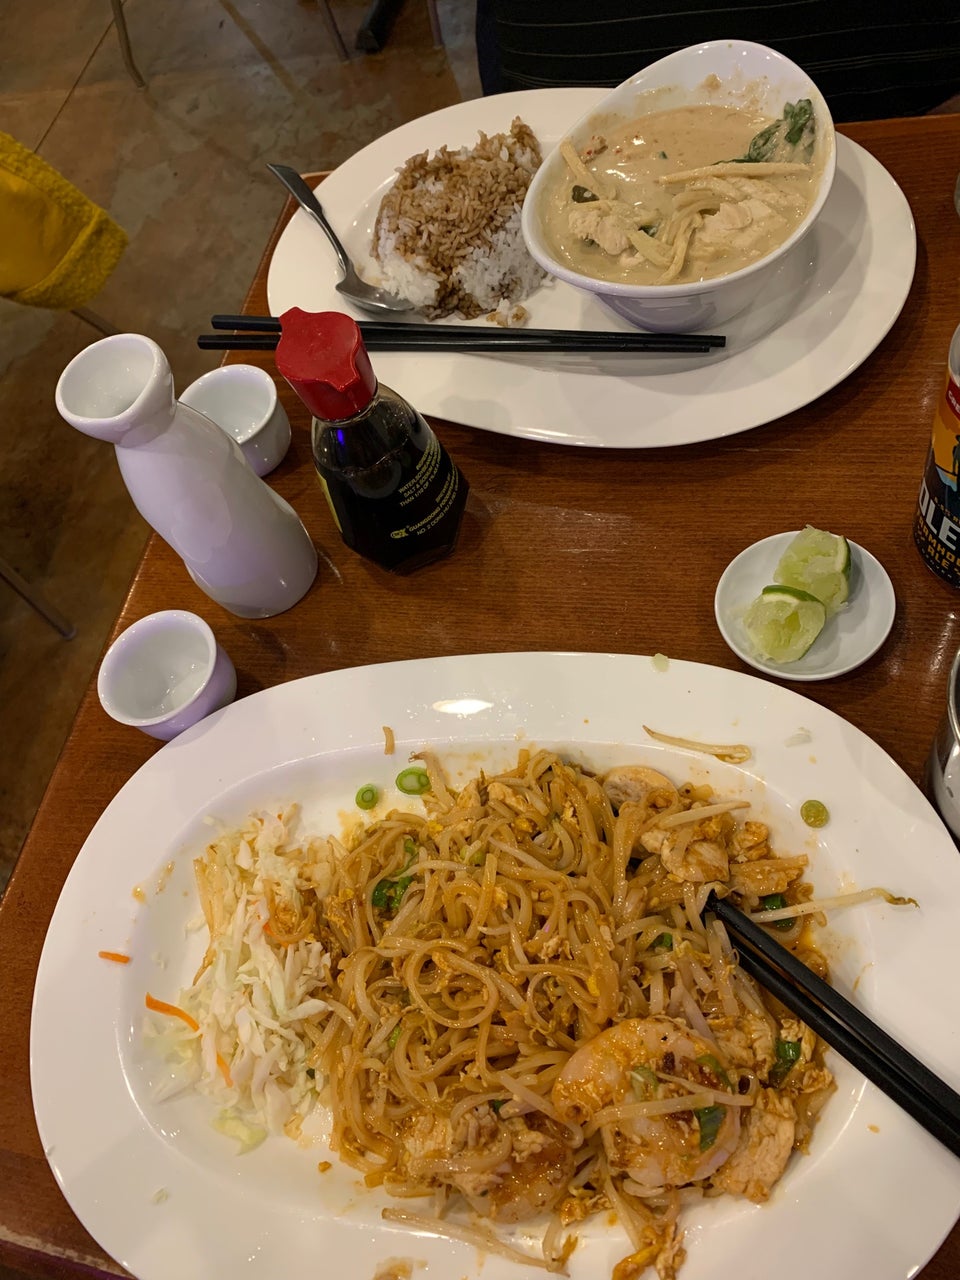 Tommy's Thai